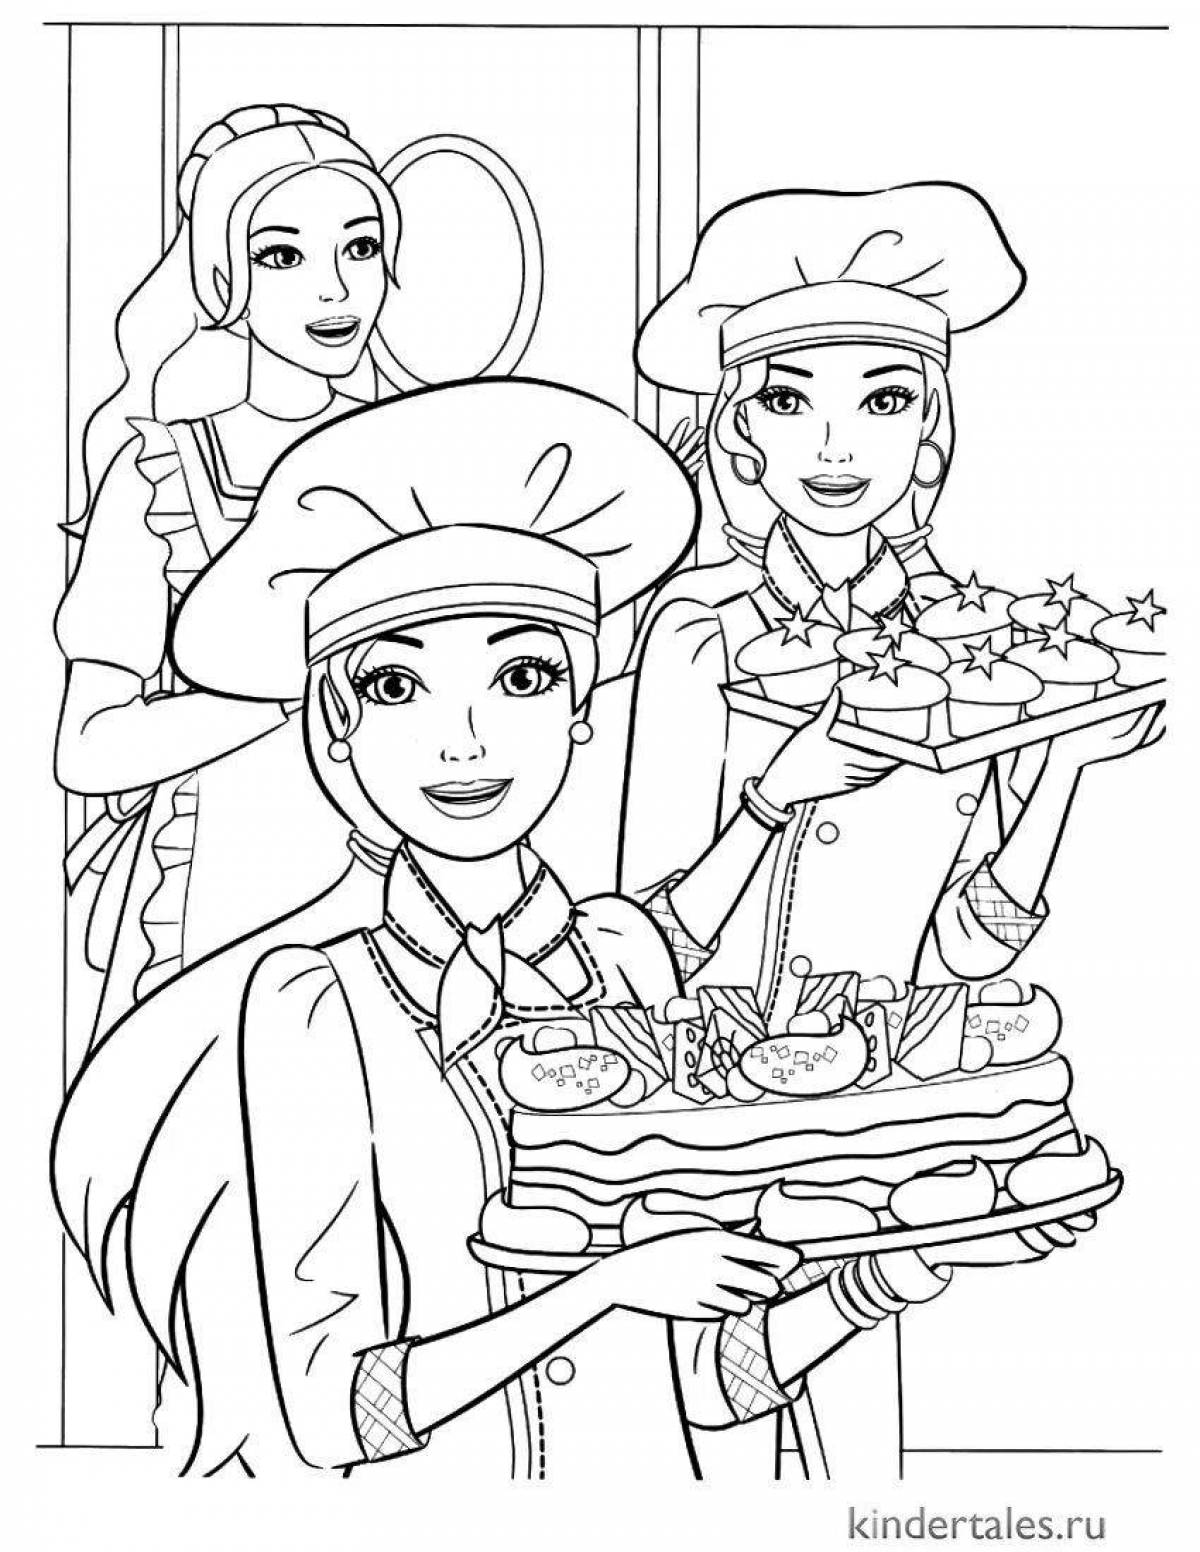 Delightful confectionery coloring book for kids